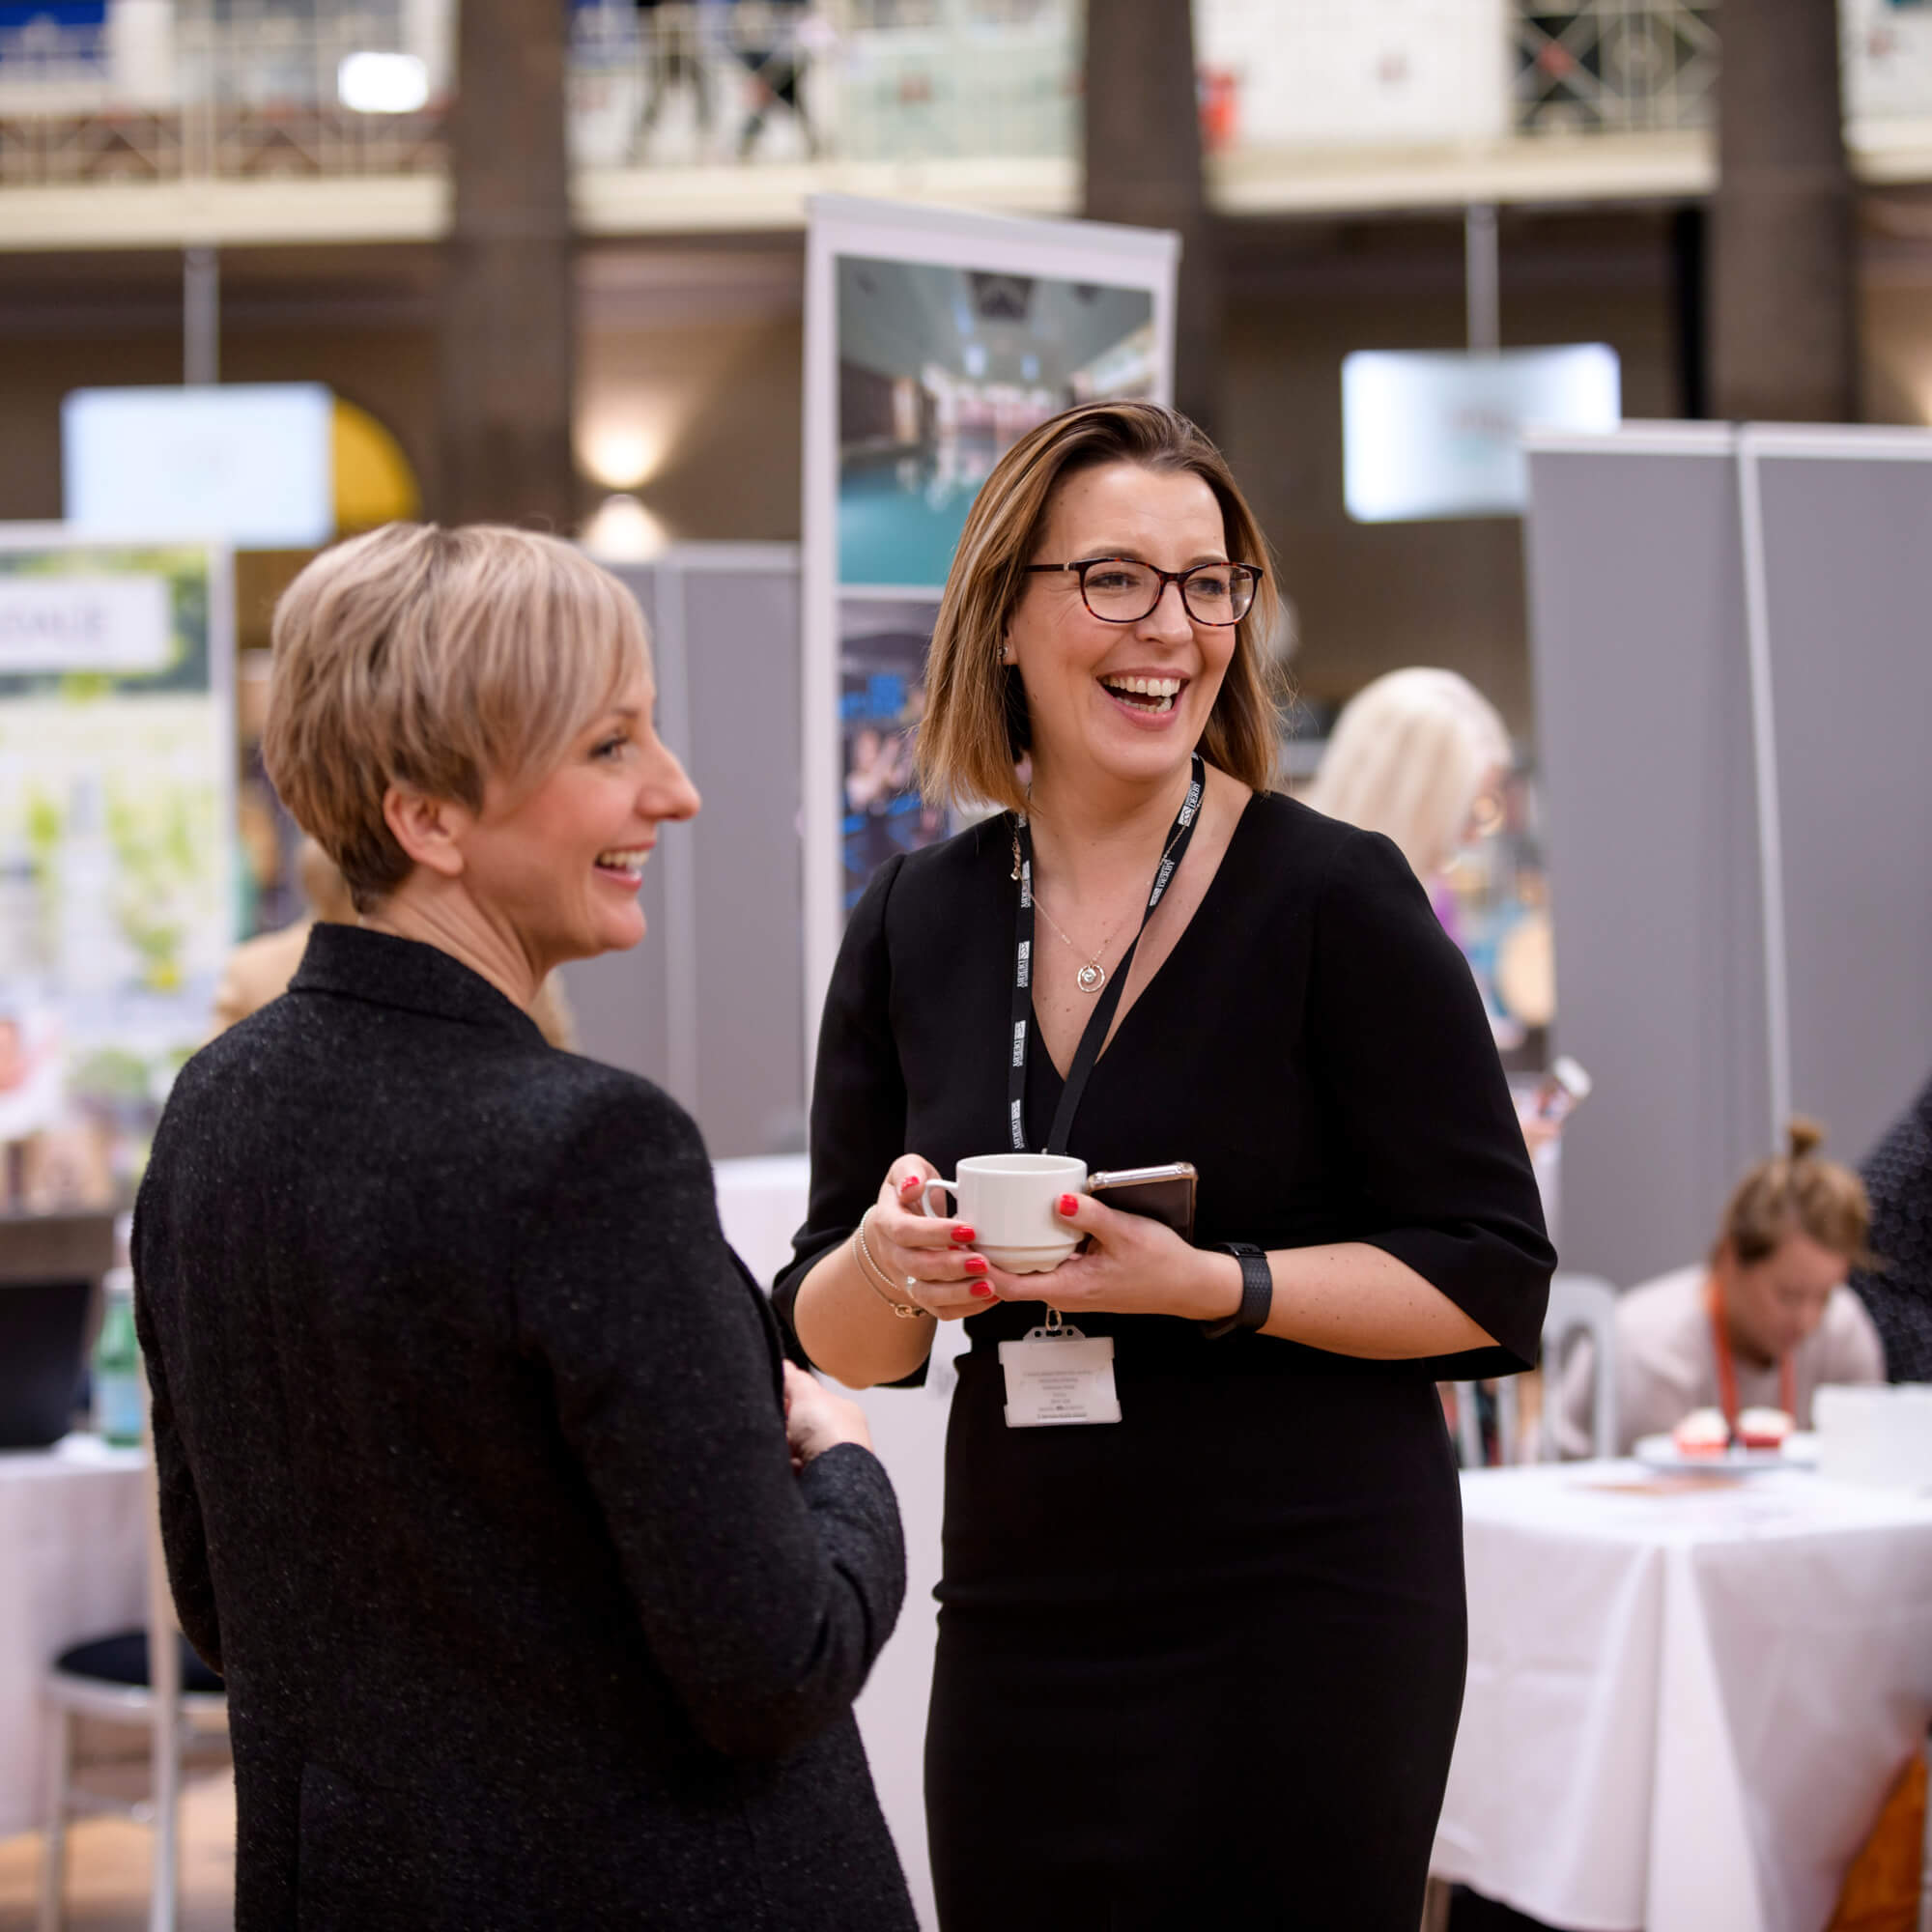 A woman holding a cup of tea smiling and talking to another woman who is also smiling in a professional networking setting